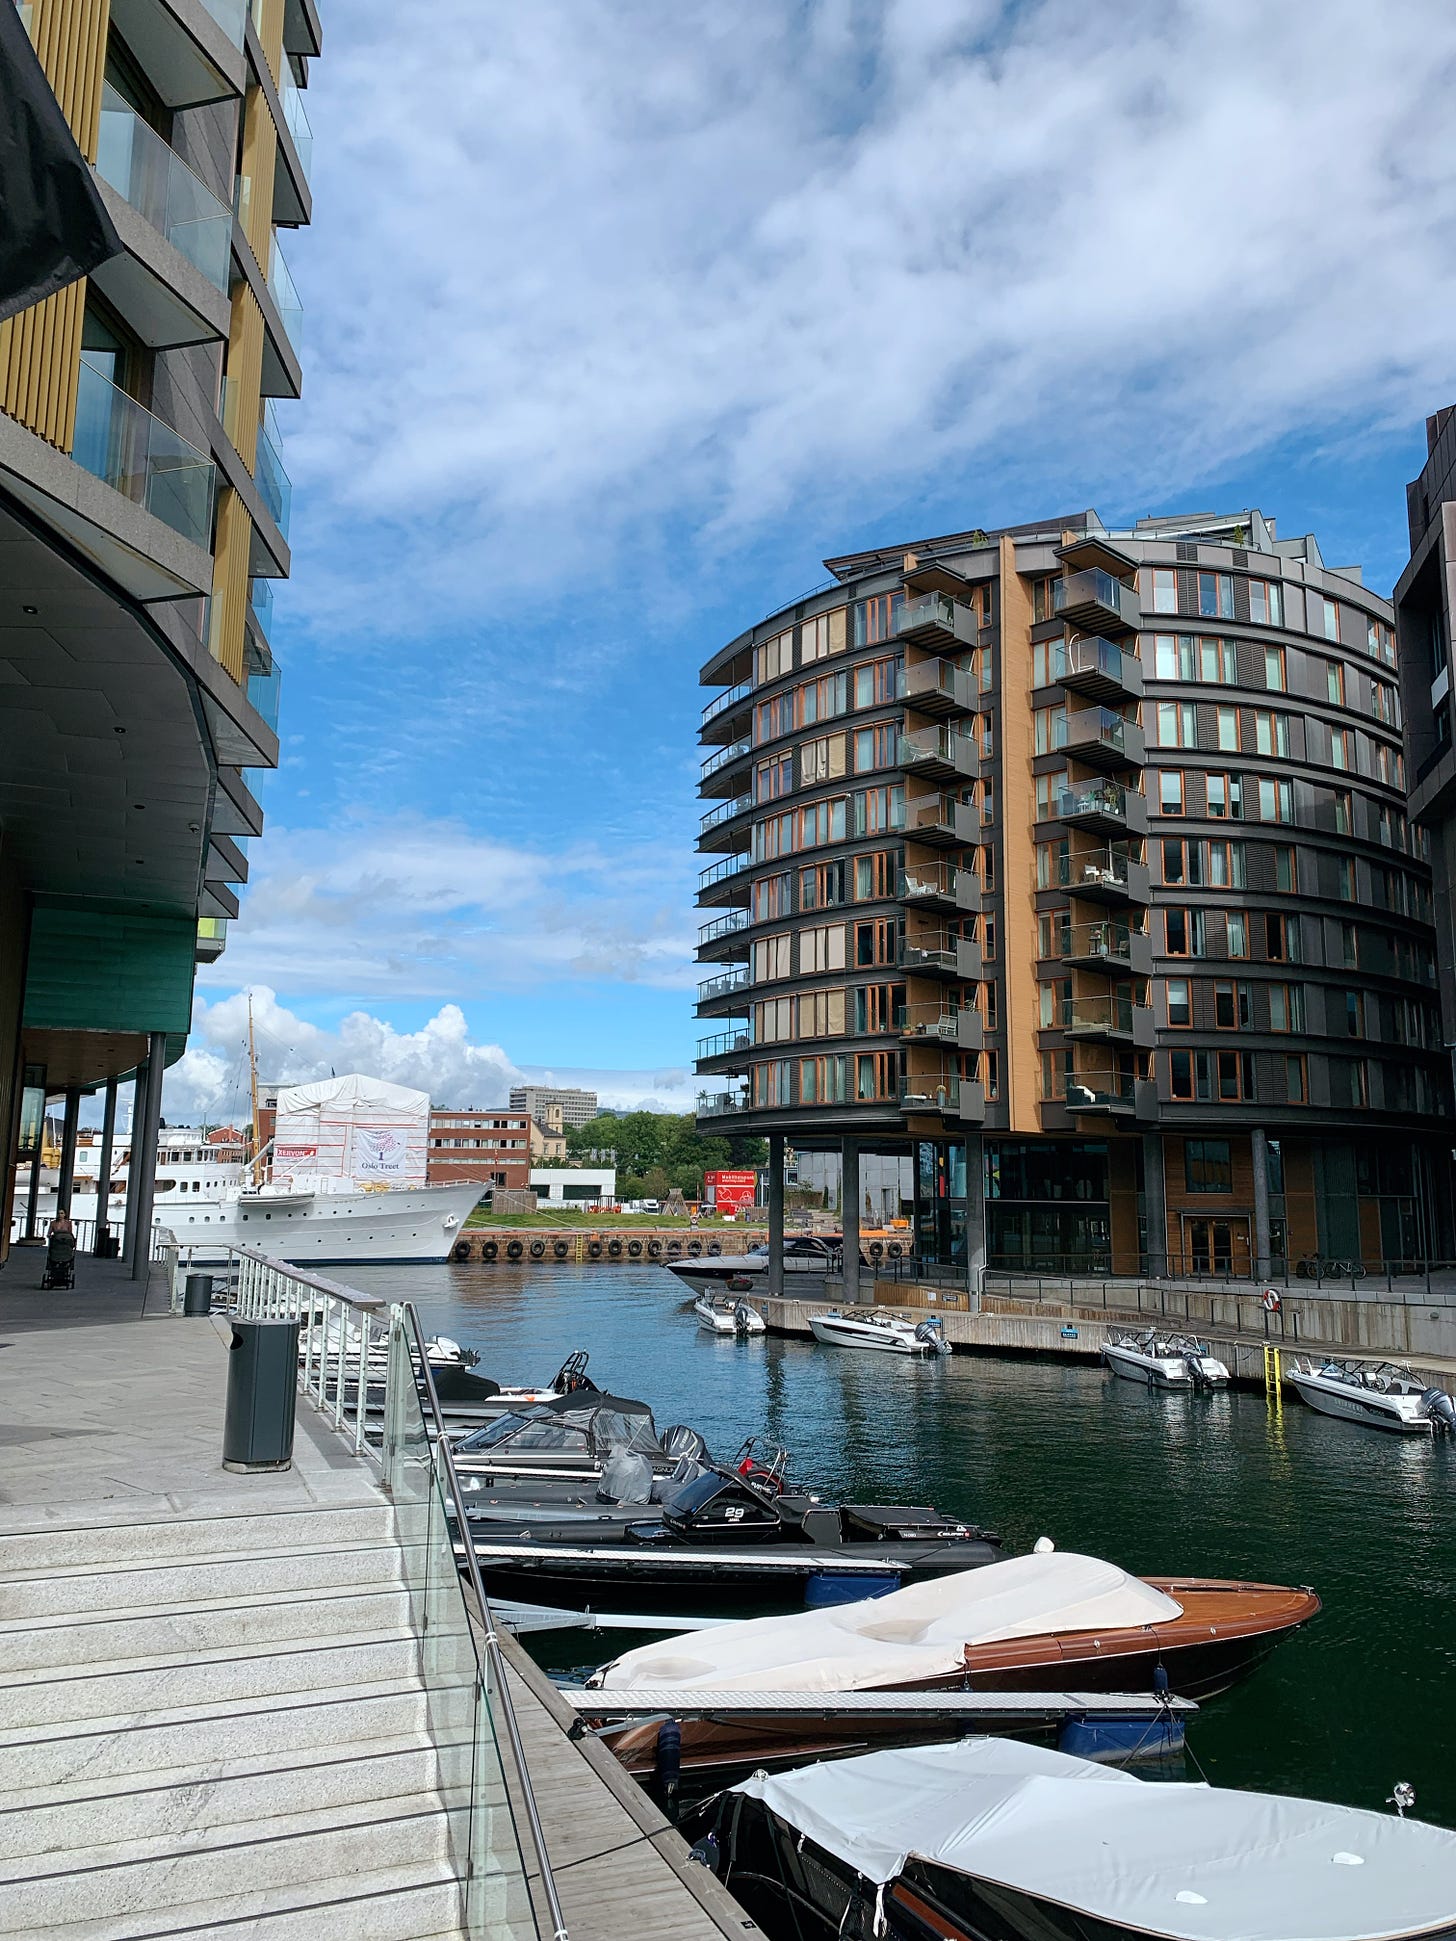 8-story apartment buildings and parked boats